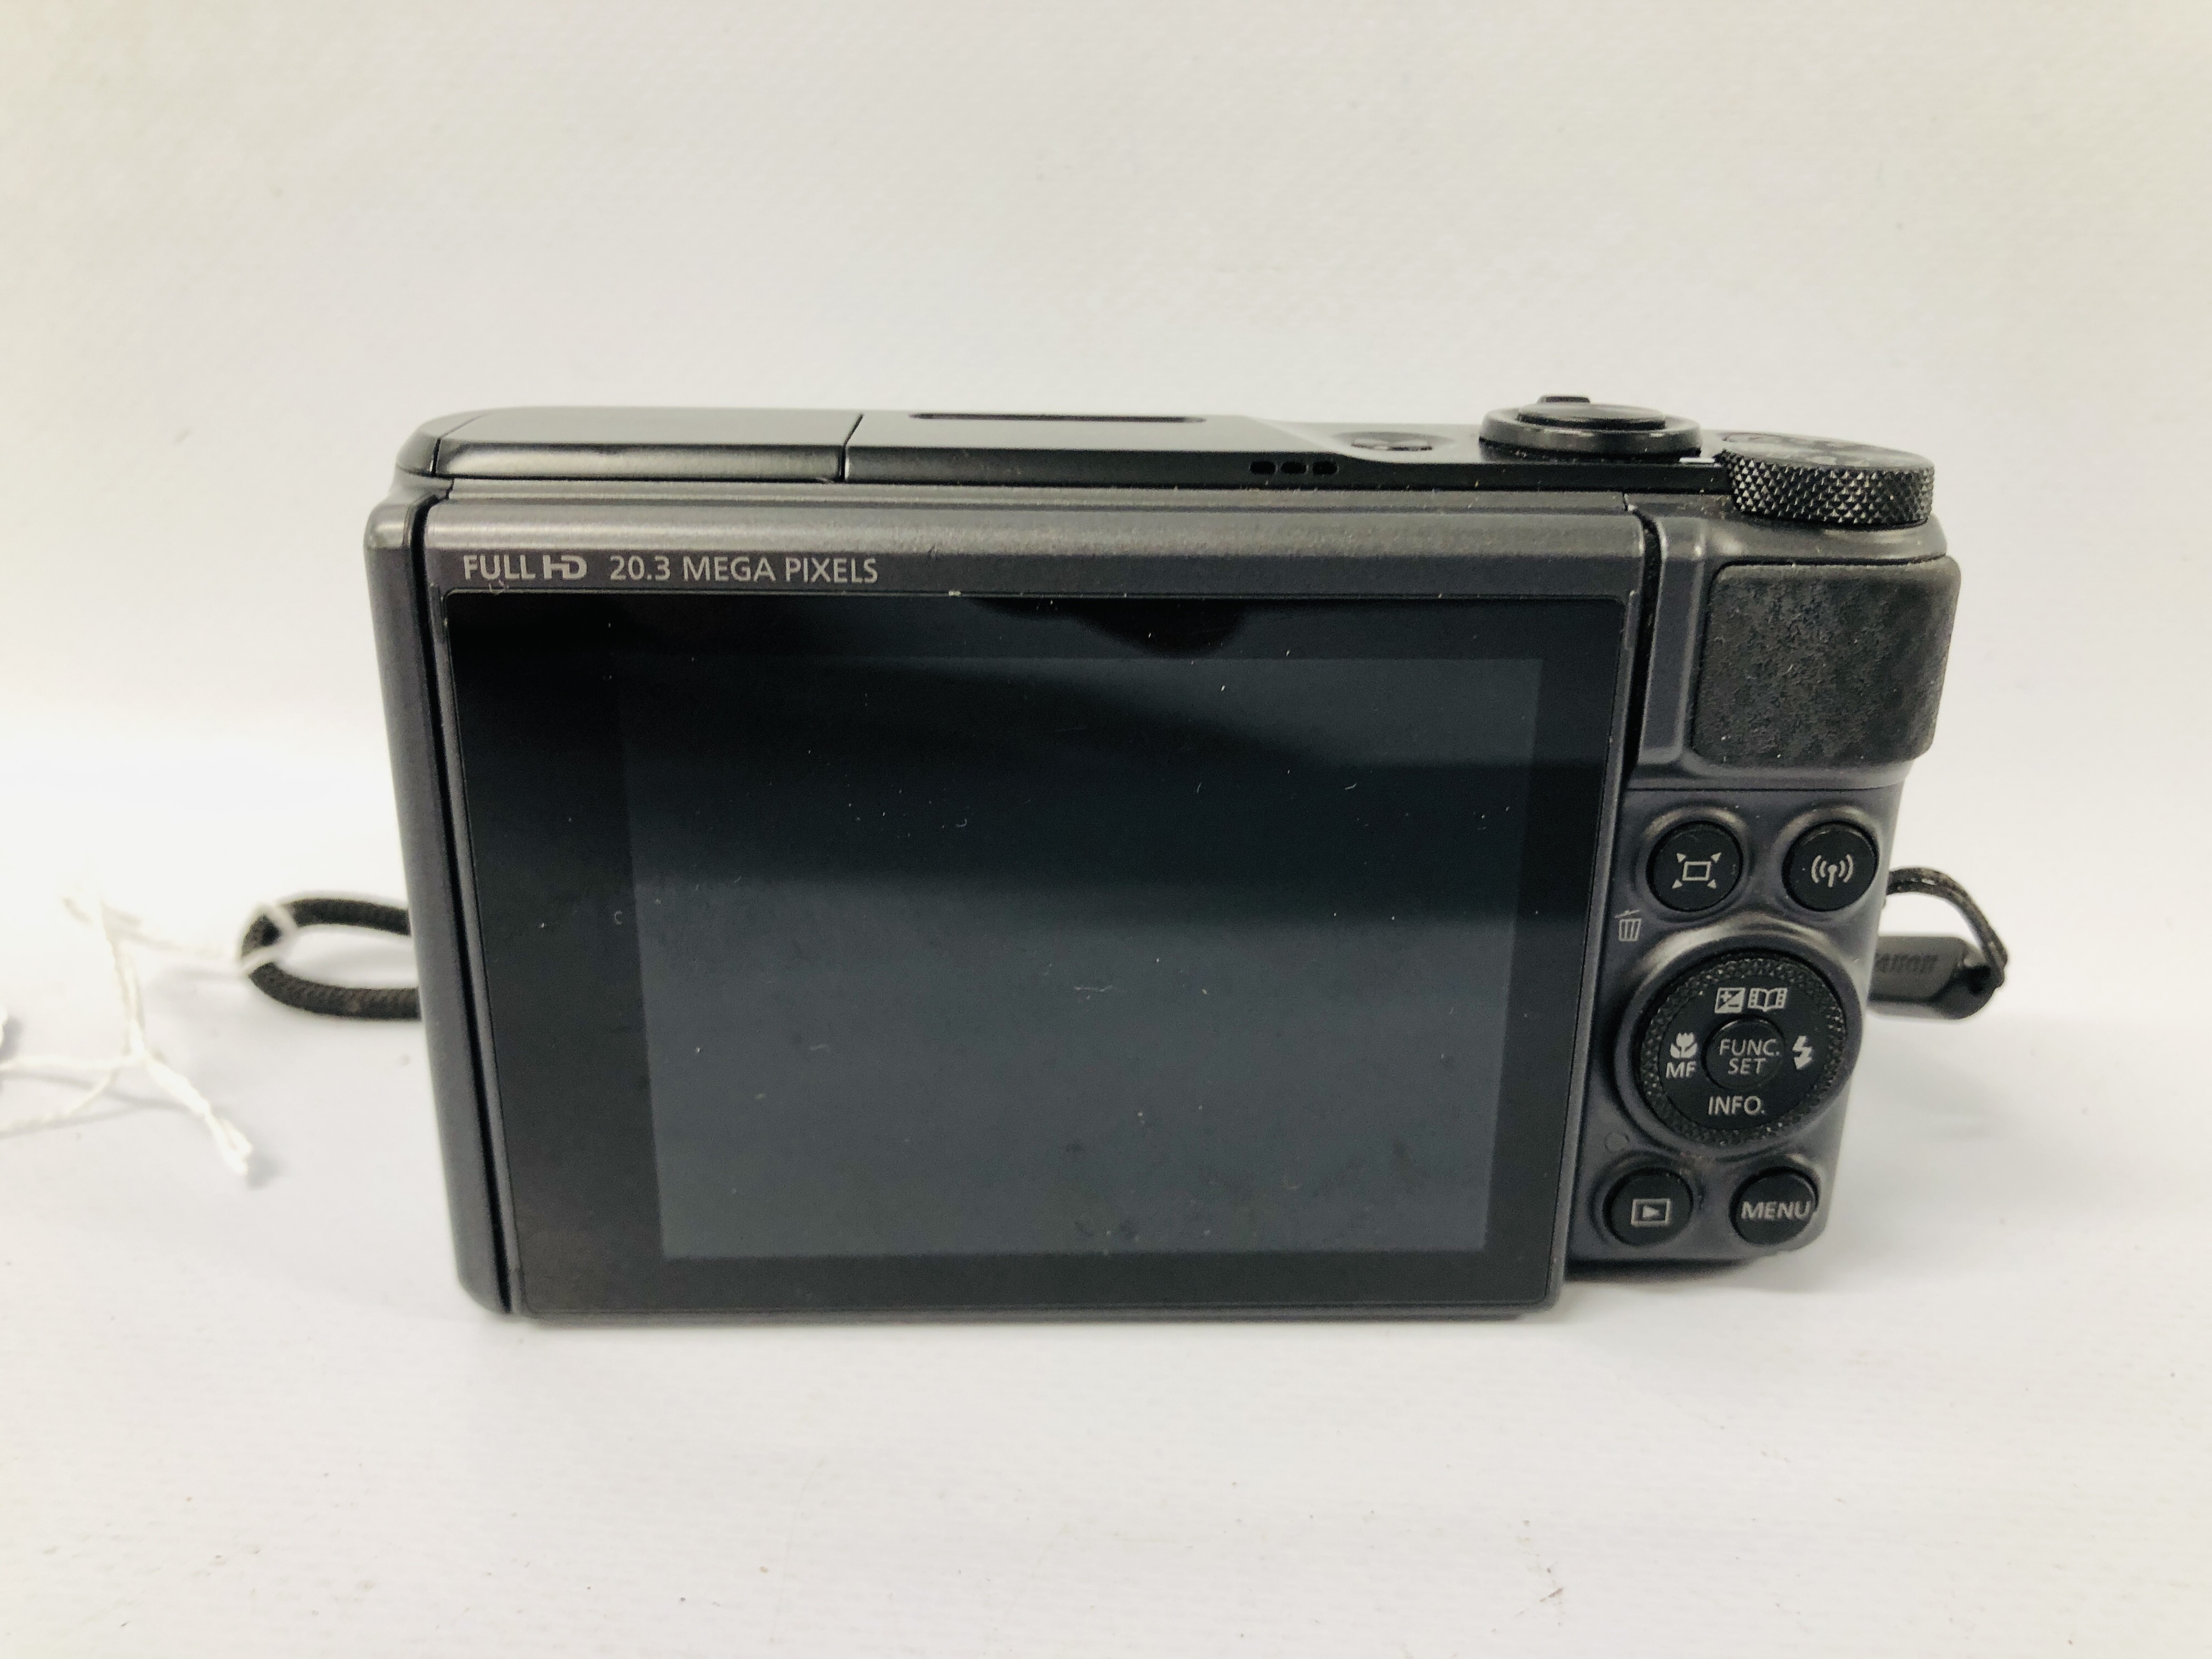 CANON SX730 HS DIGITAL CAMERA S/N 722063000816 - SOLD AS SEEN. - Image 3 of 6